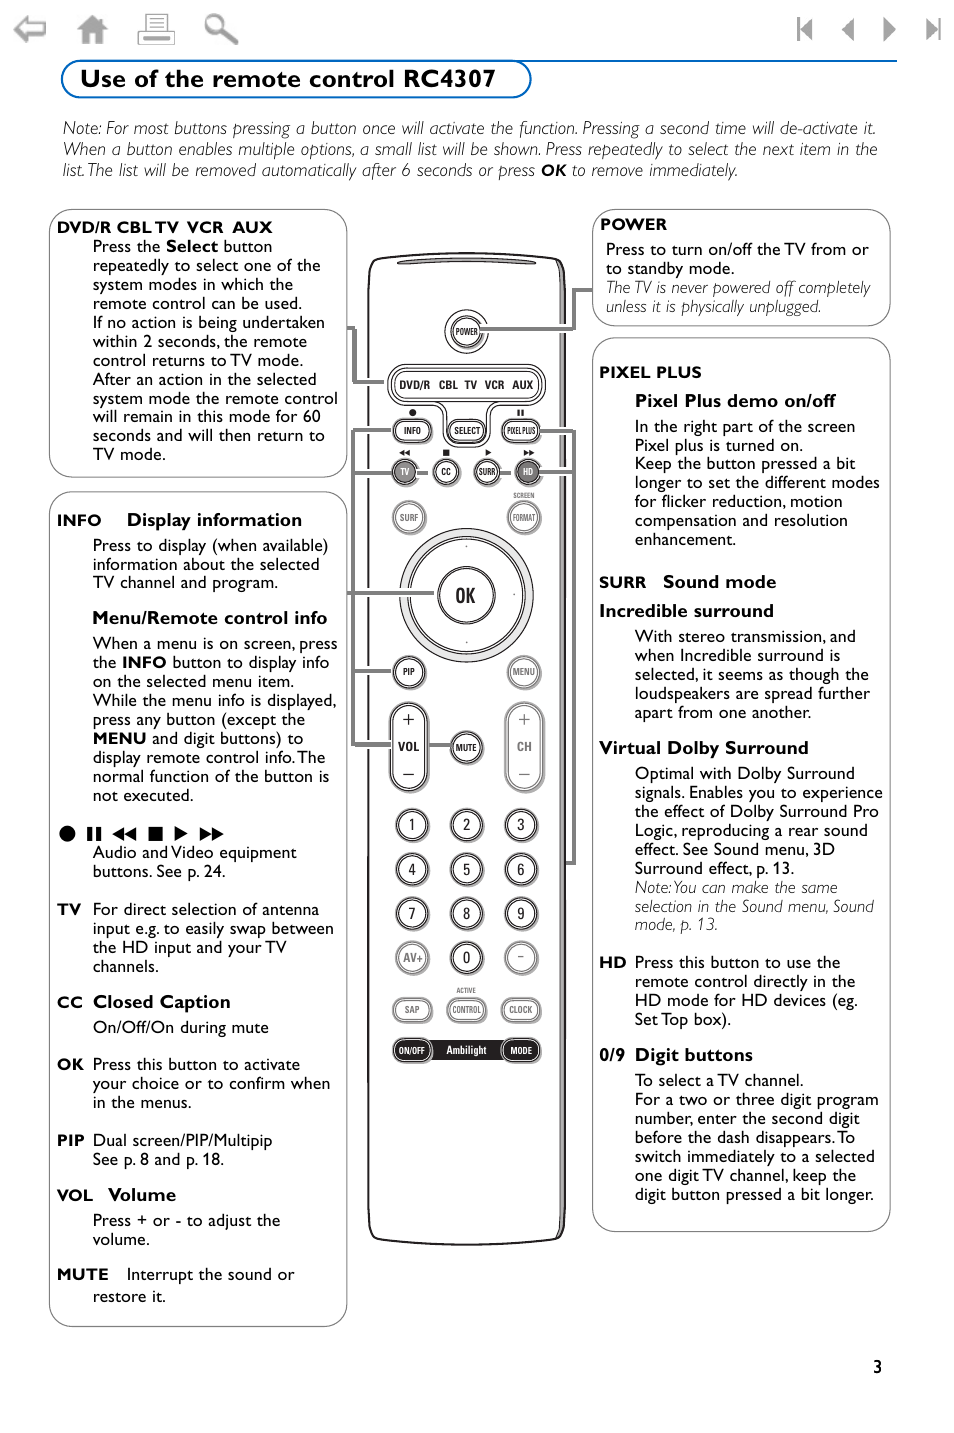 Use of the remote control rc, Use of the remote control rc4307, Pixel plus  demo on/off | Philips 32PF9996-37 User Manual | Page 7 / 38 | Original mode